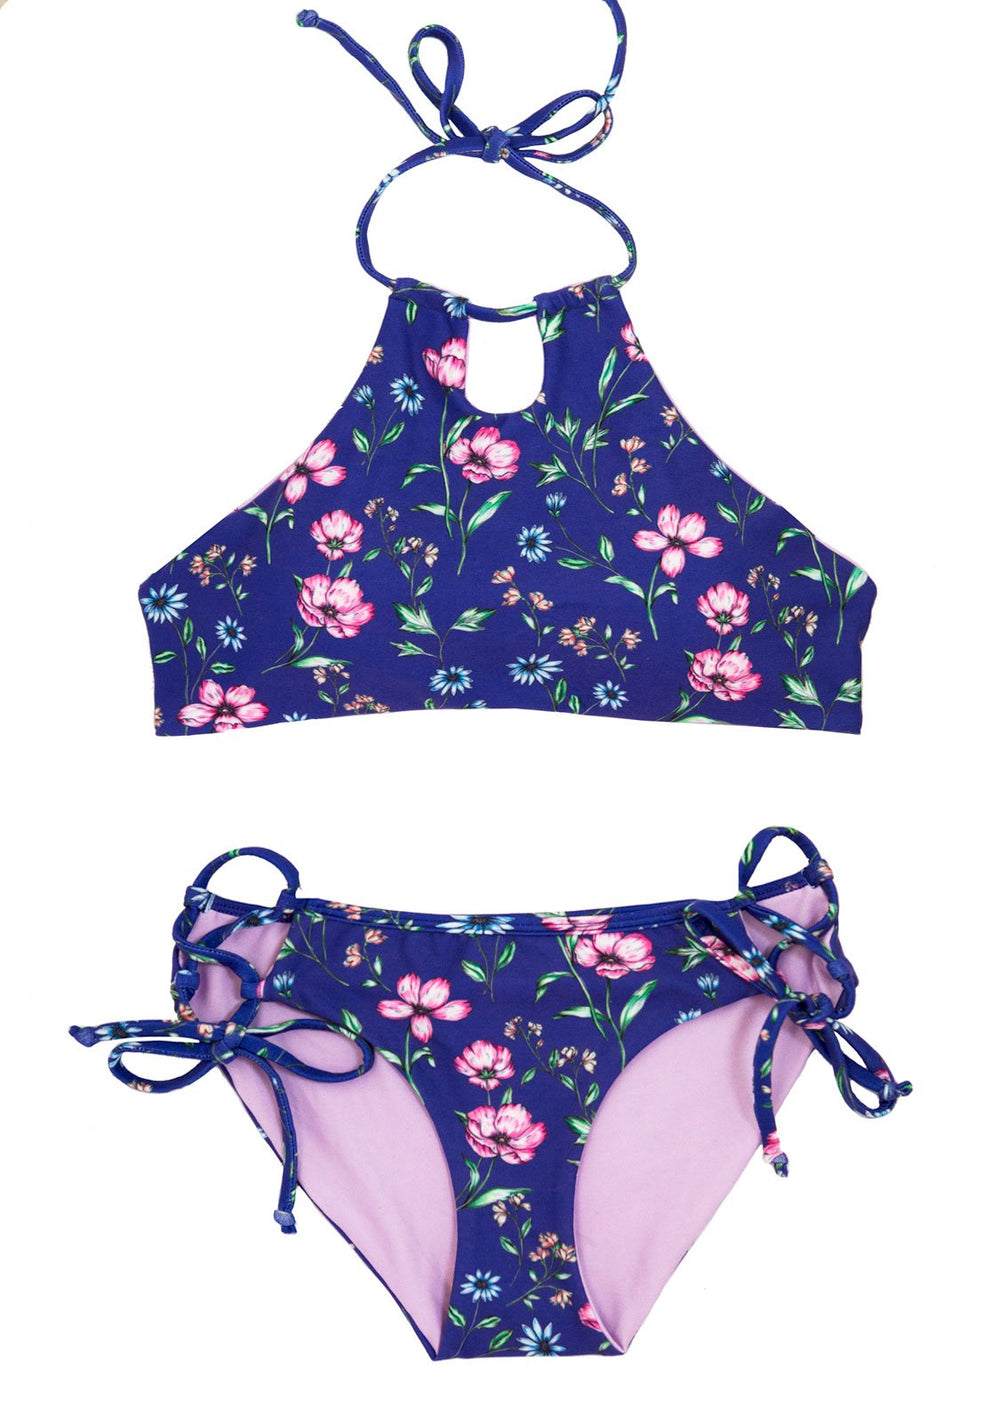 2 Piece Purple Floral Bikini SET for Girls with Padded HALTER Top